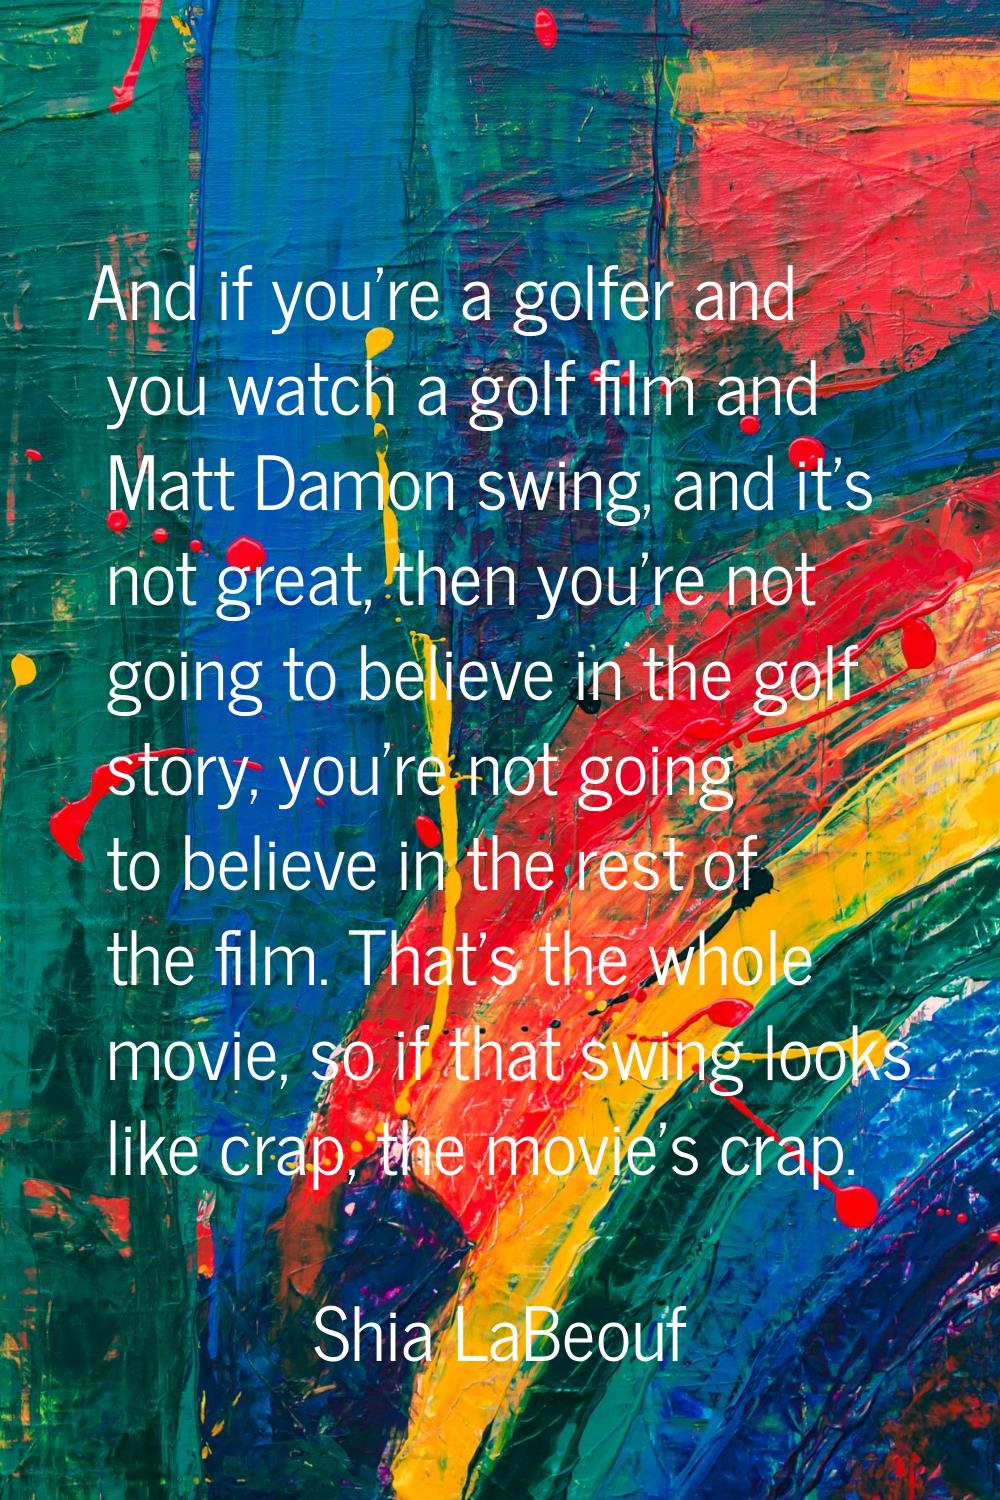 And if you're a golfer and you watch a golf film and Matt Damon swing, and it's not great, then you